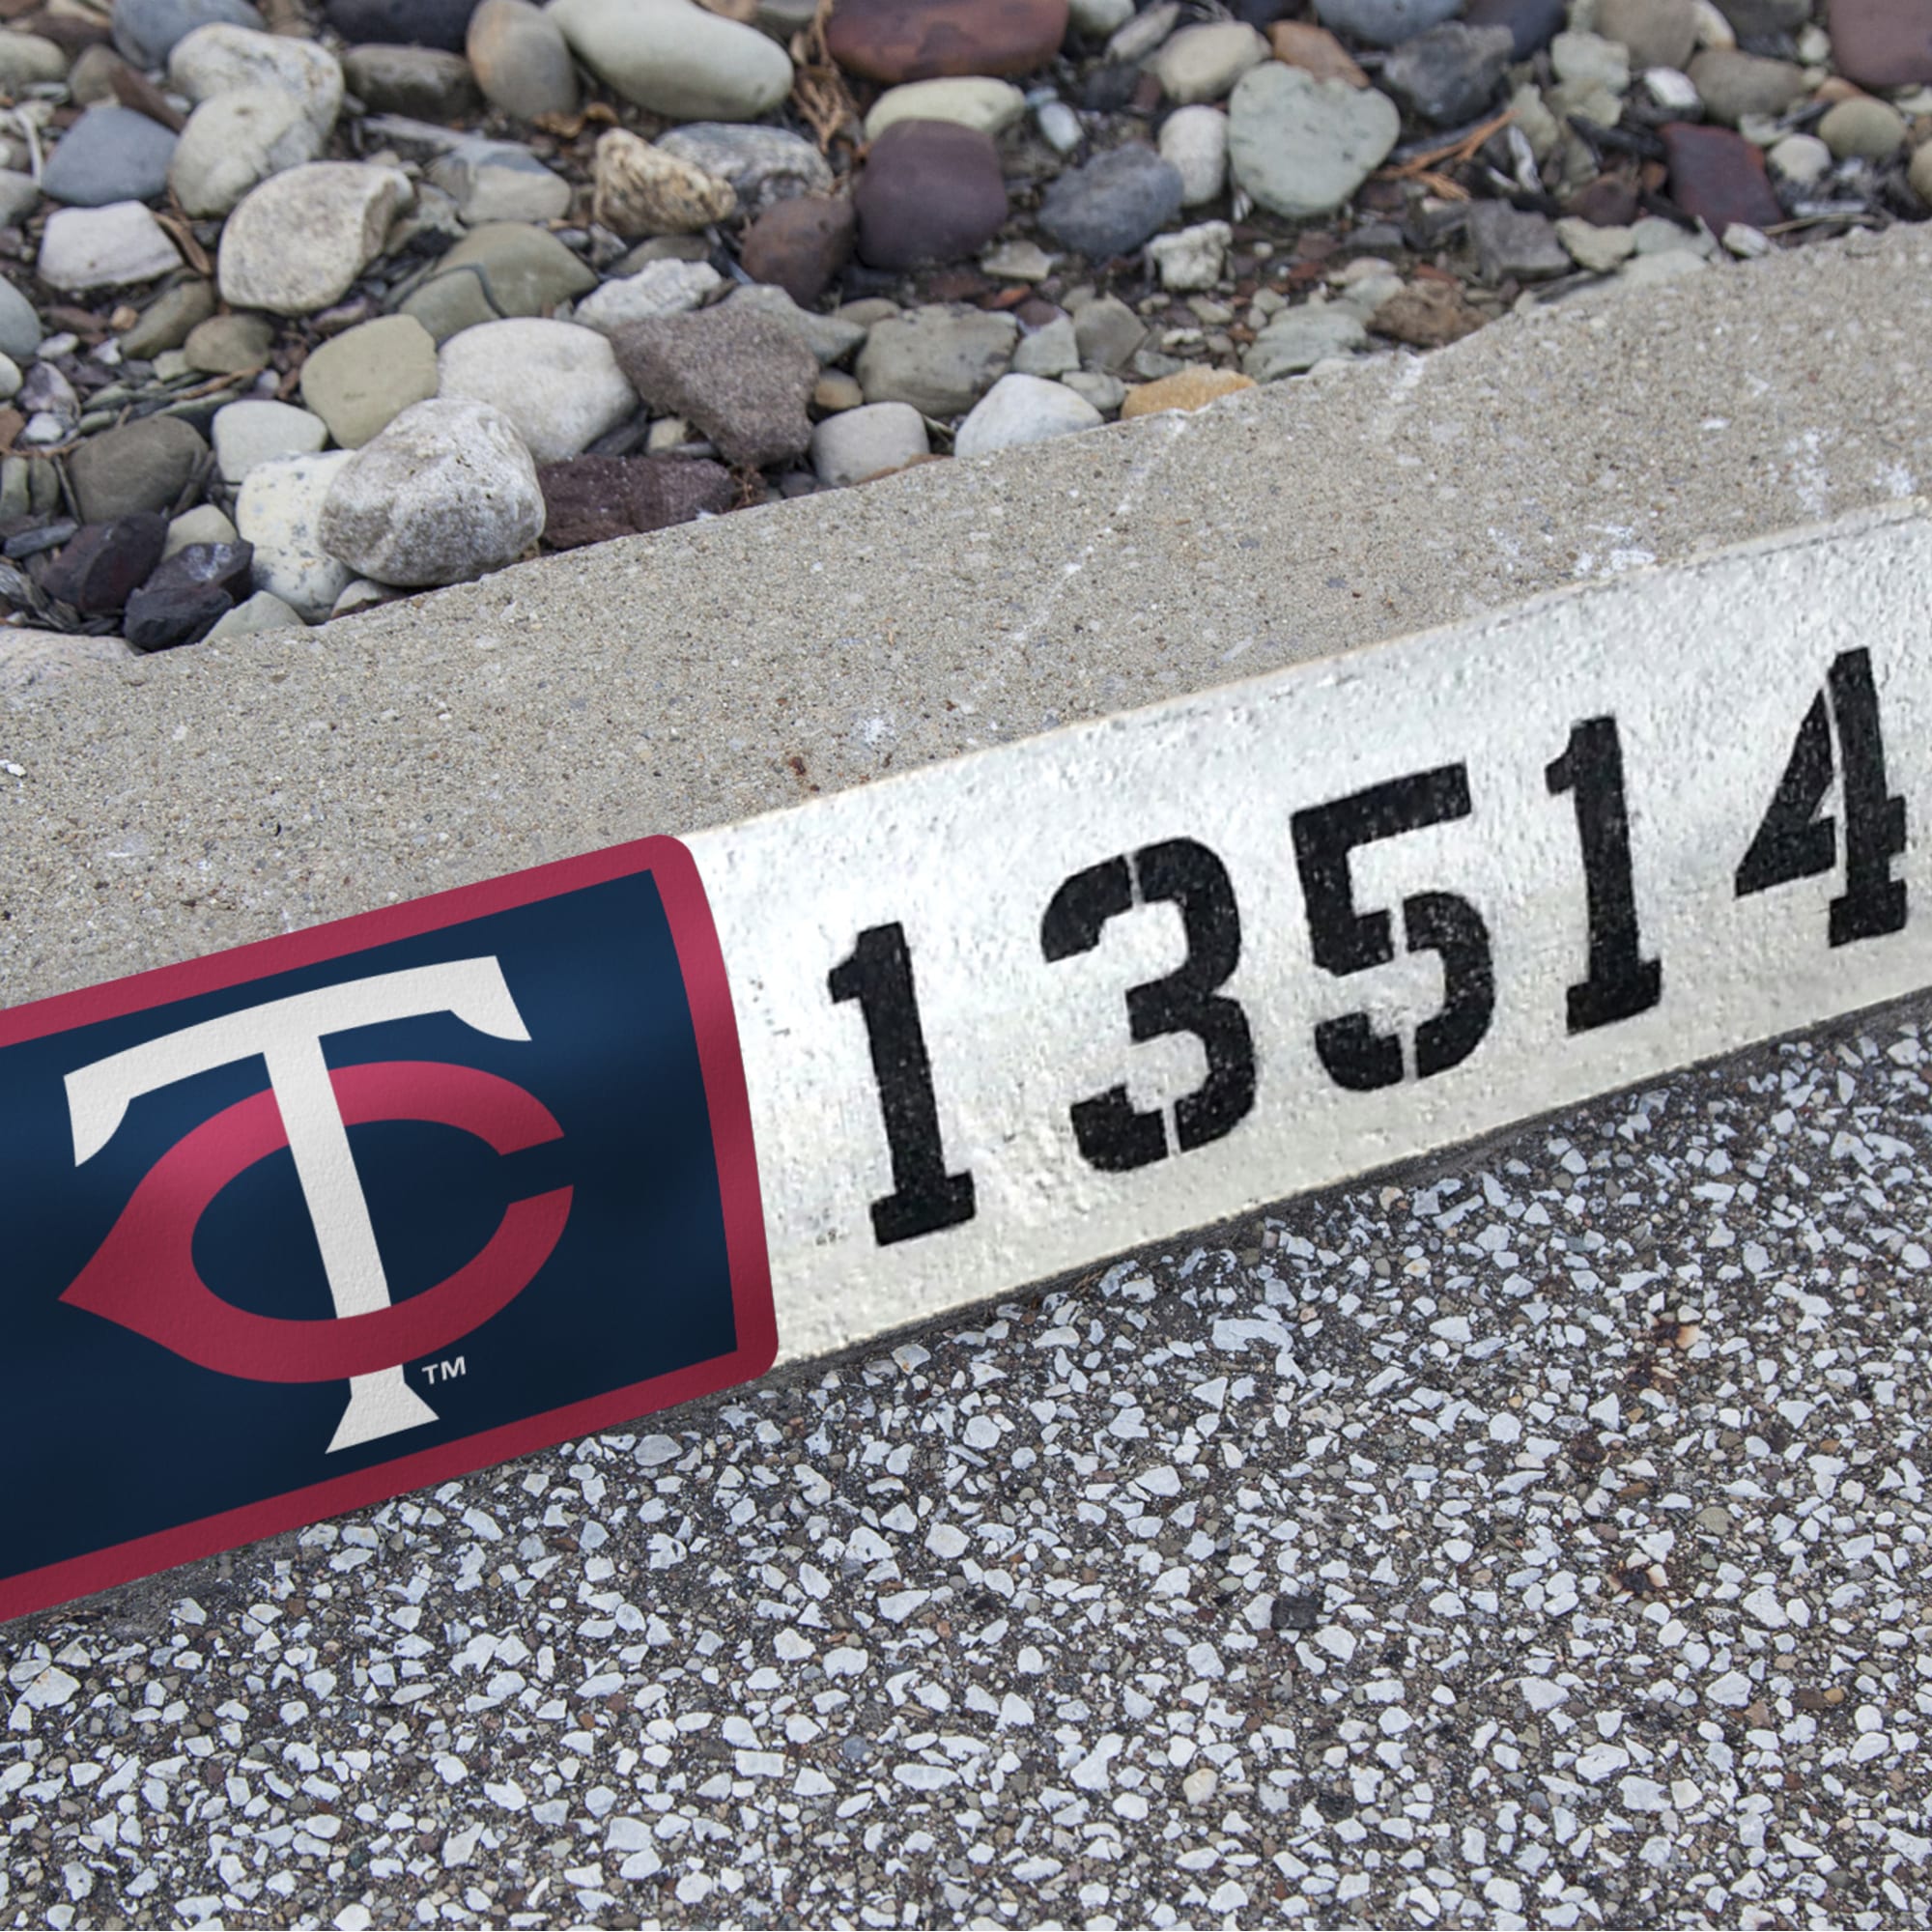 Minnesota Twins: Address Block - Officially Licensed MLB Outdoor Graphic 6.0"W x 8.0"H by Fathead | Wood/Aluminum